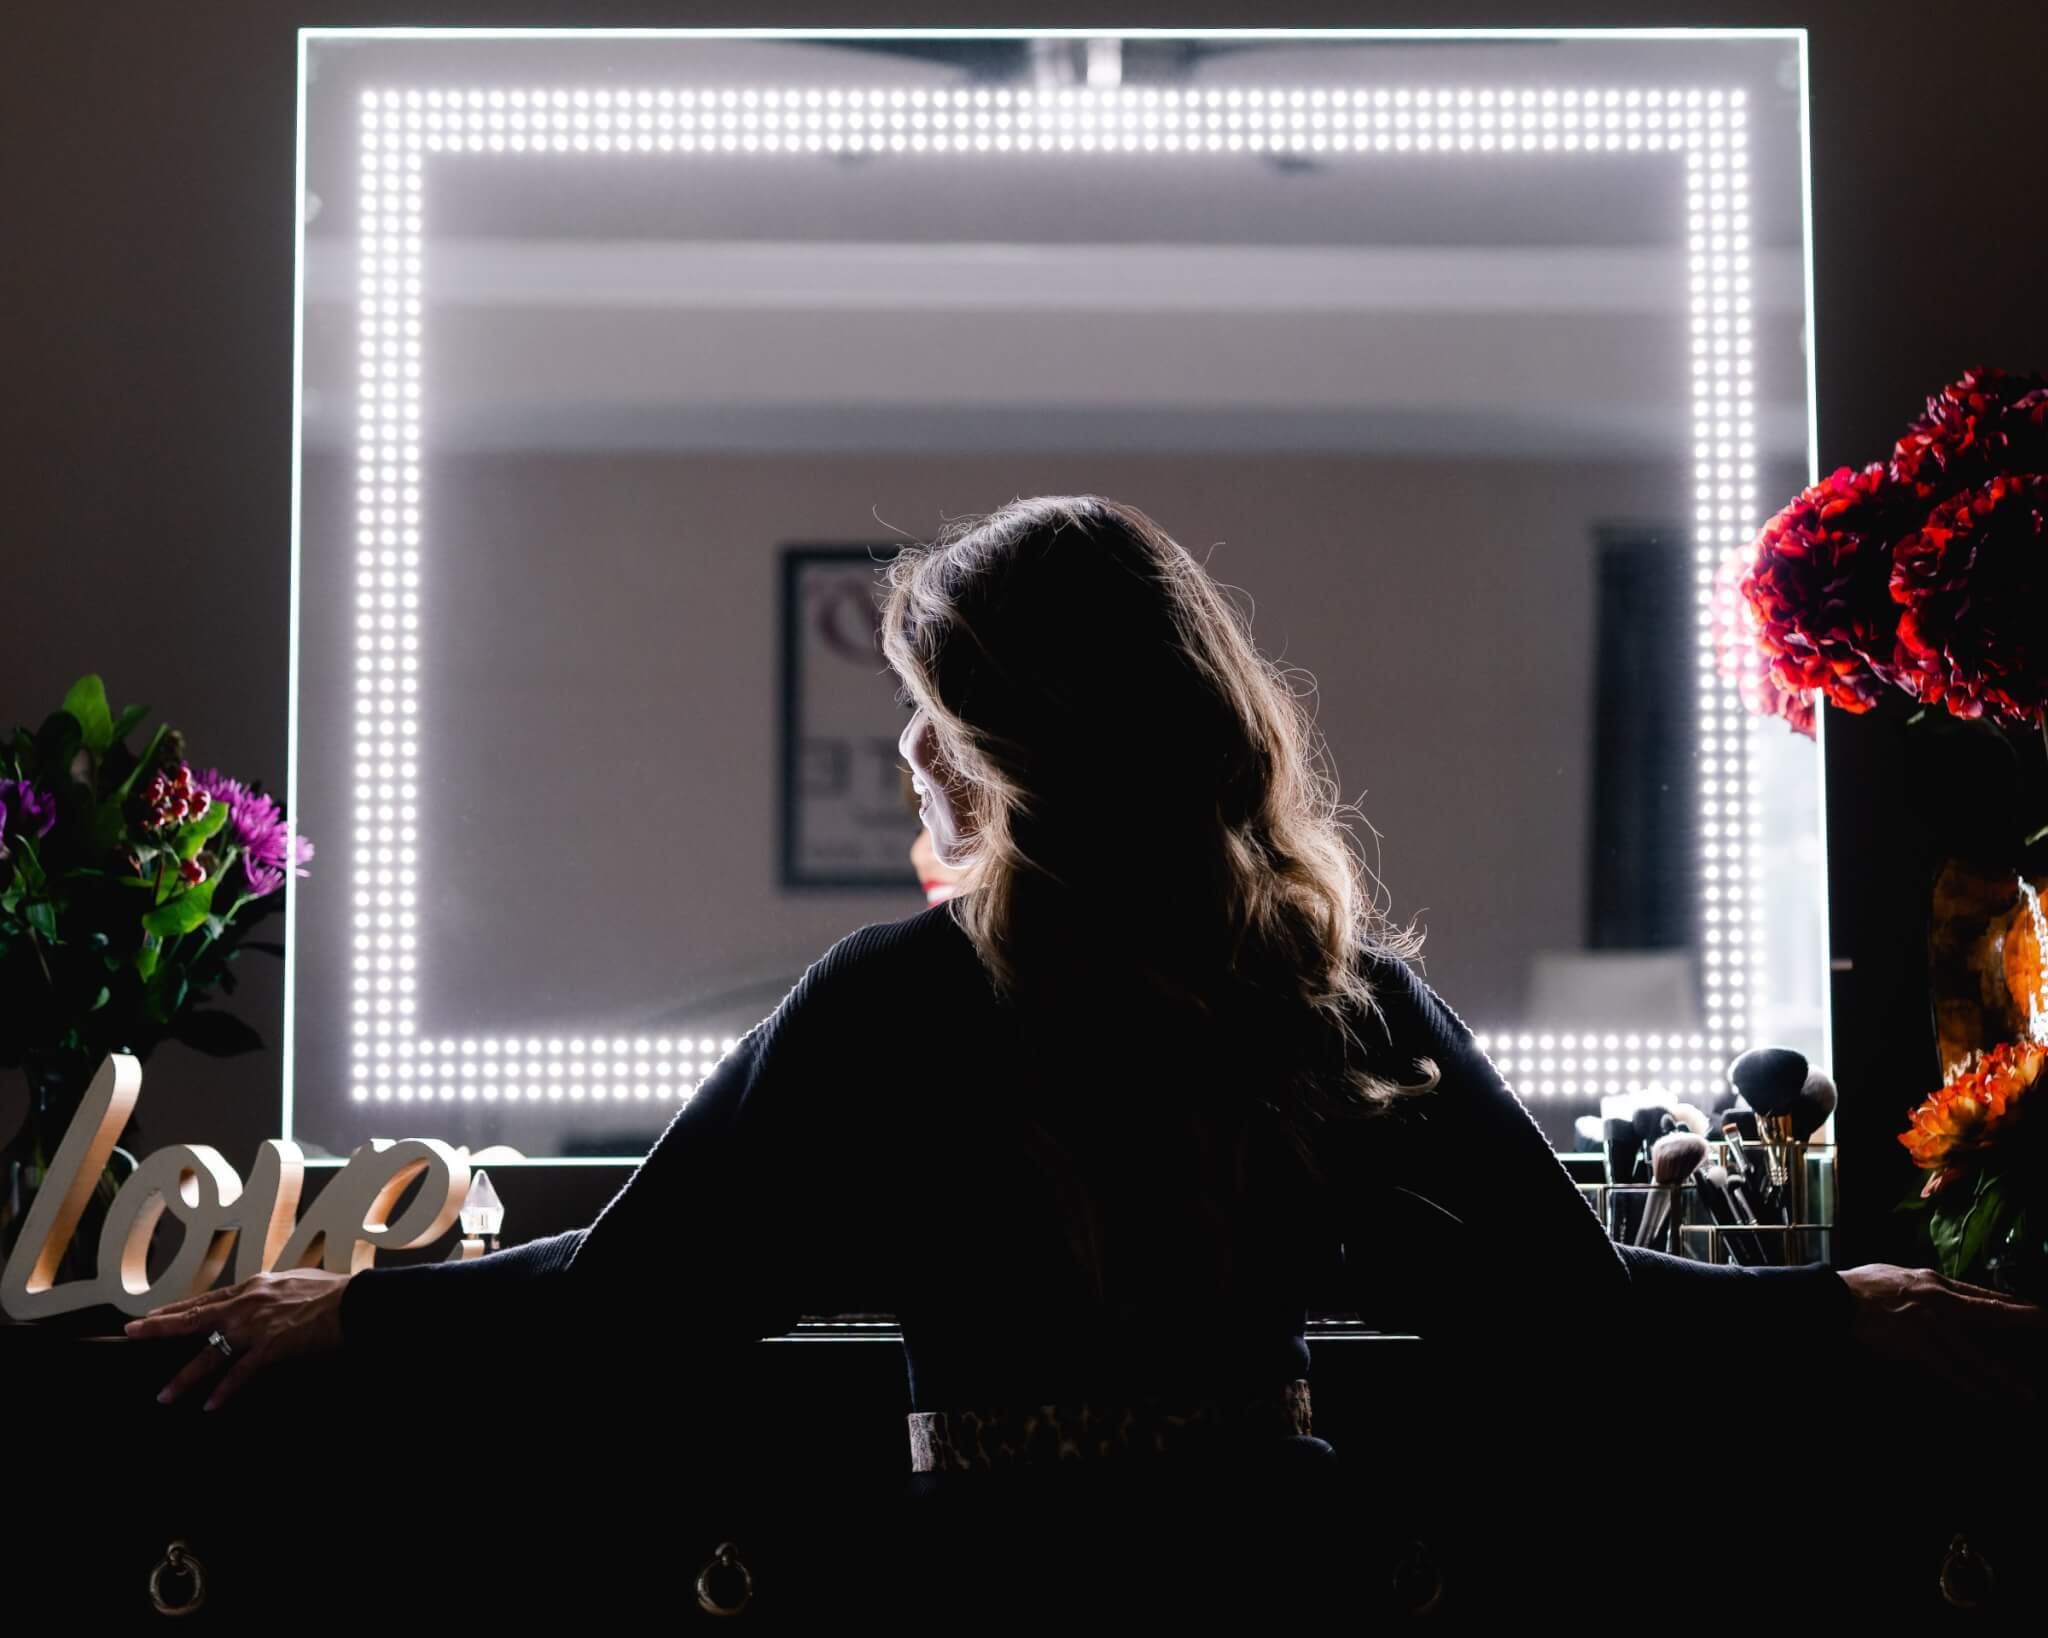 smiling woman facing sideways standing in front of glamcor socialite mirror with led lights on the brightest setting